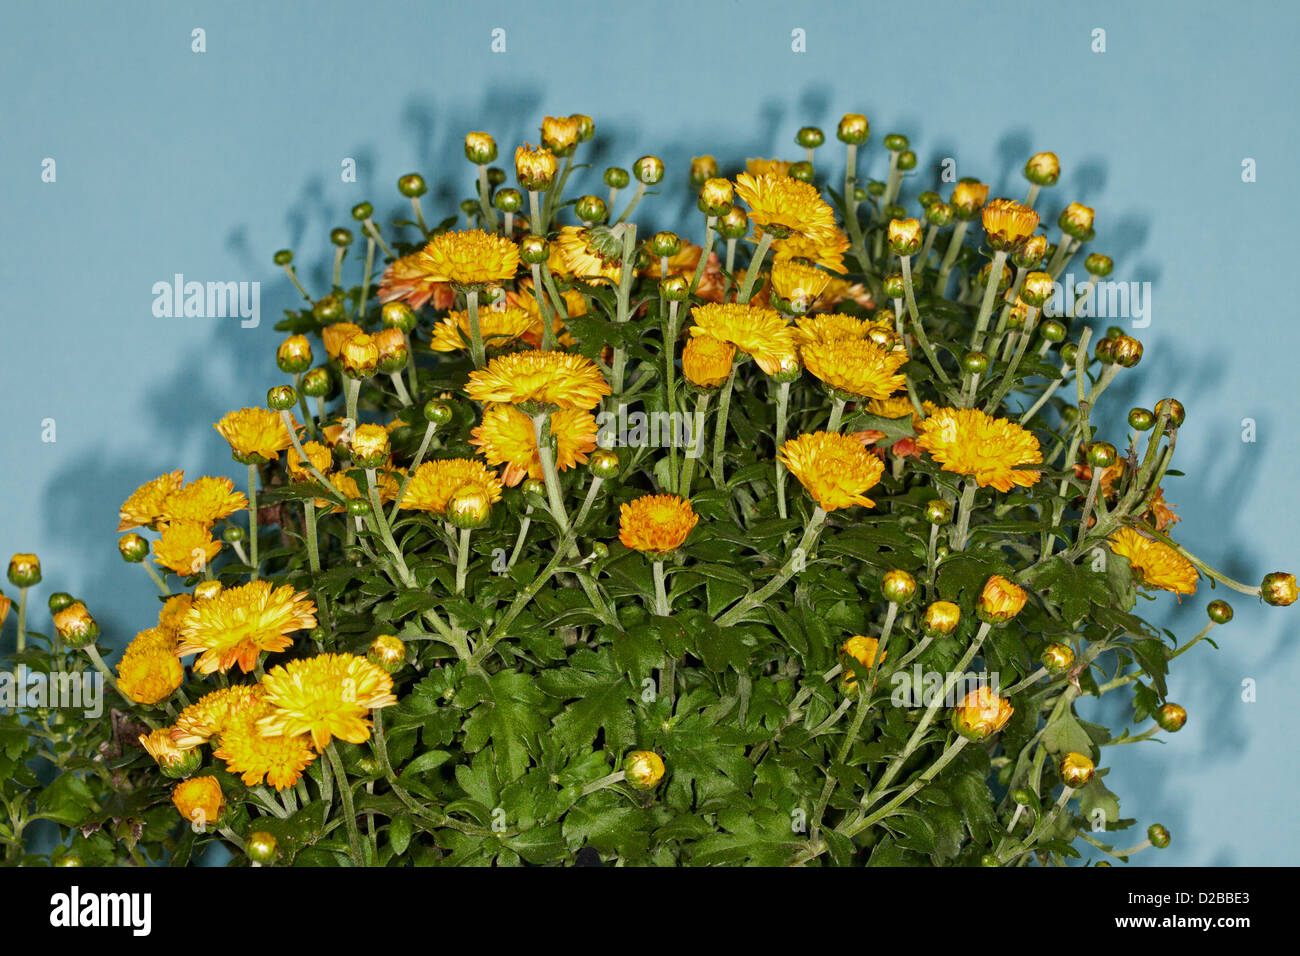 Golden yellow and orange flowers and foliage of Chrysanthemum multicolor 'Fantasia' against a blue background Stock Photo